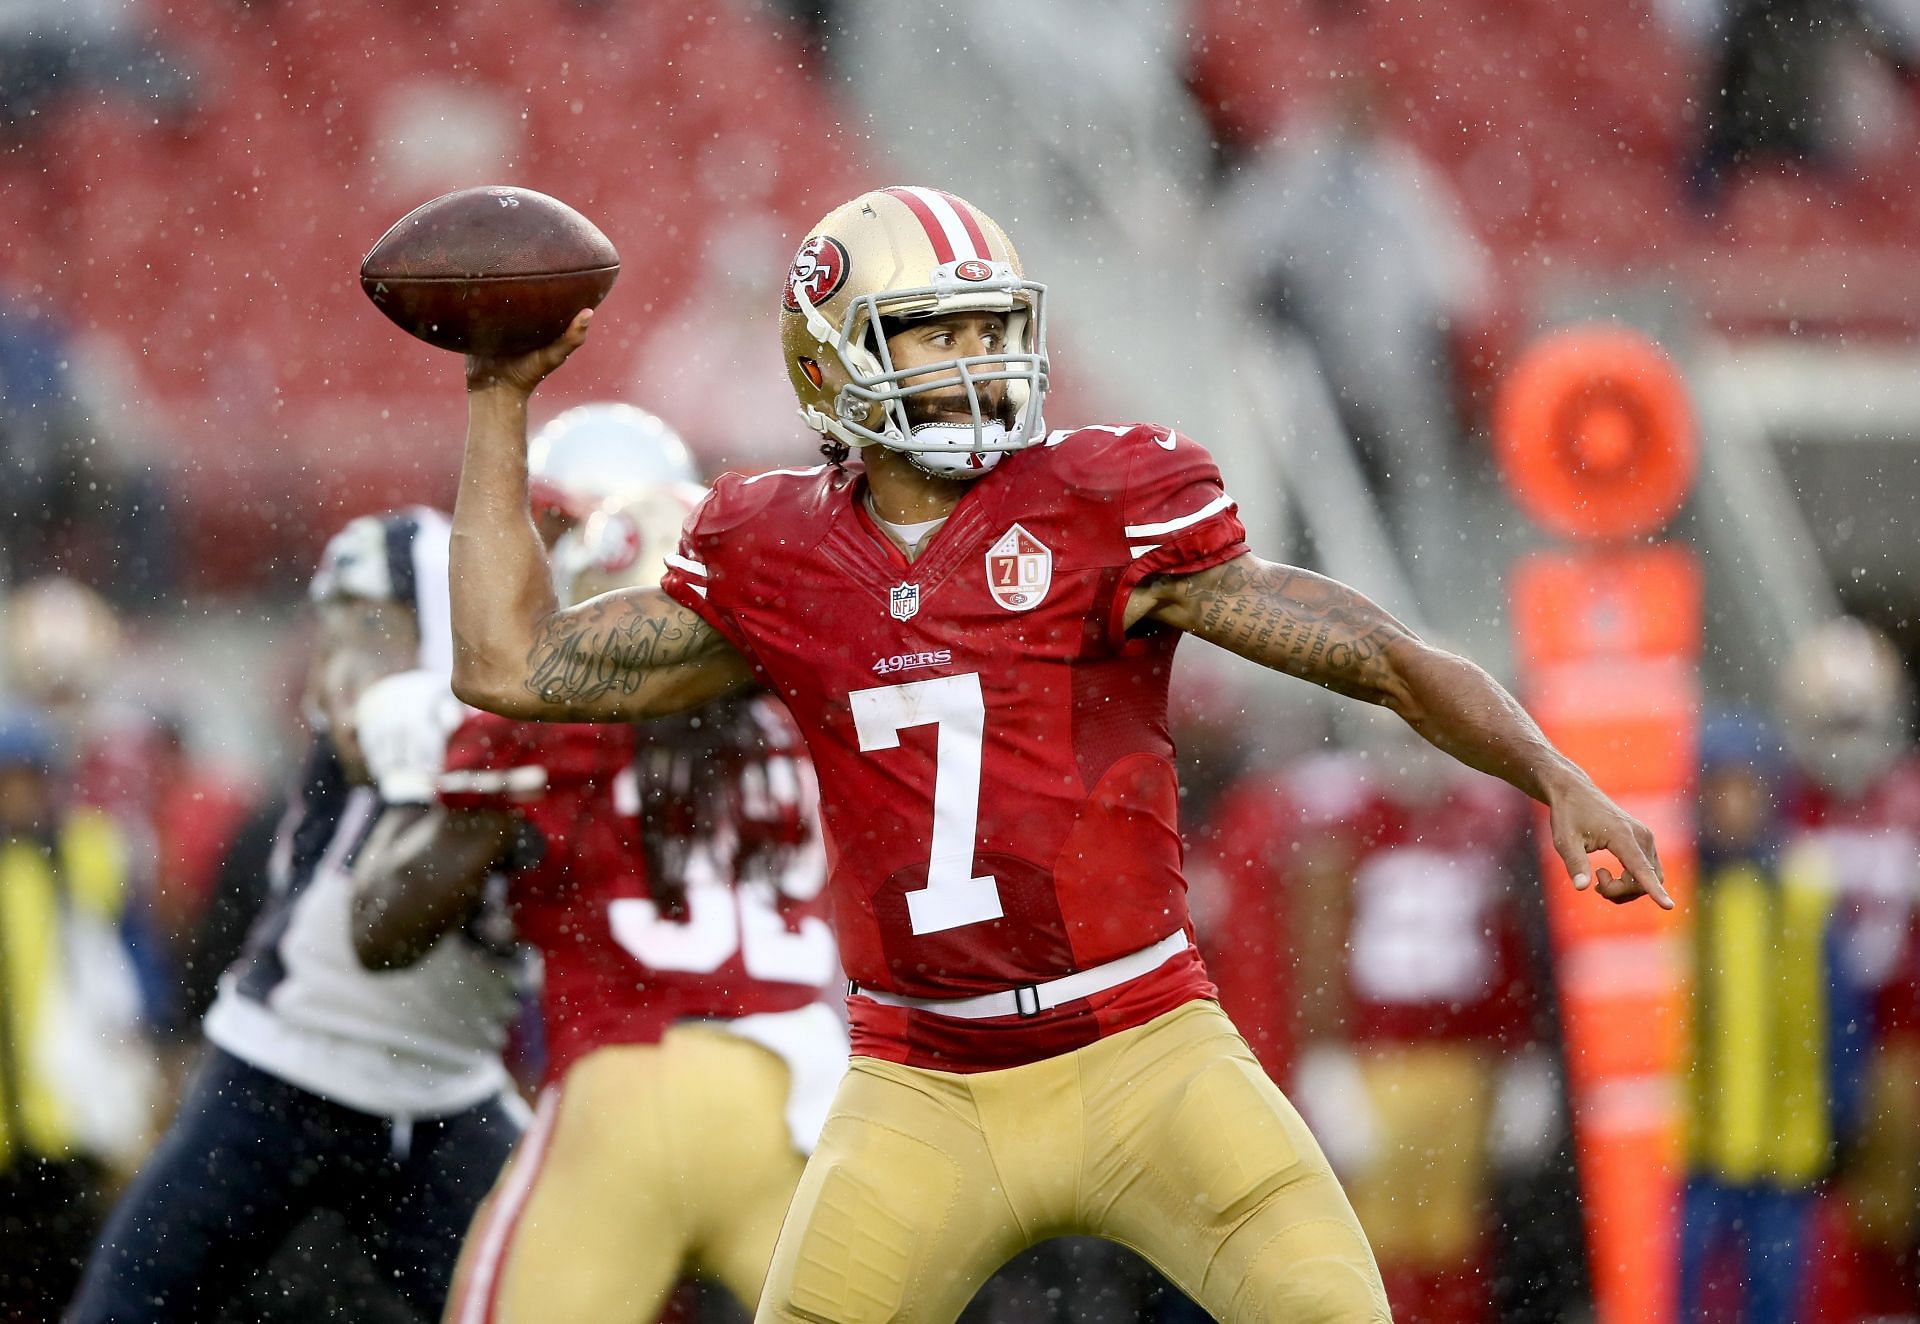 Kaepernick is still out of the NFL